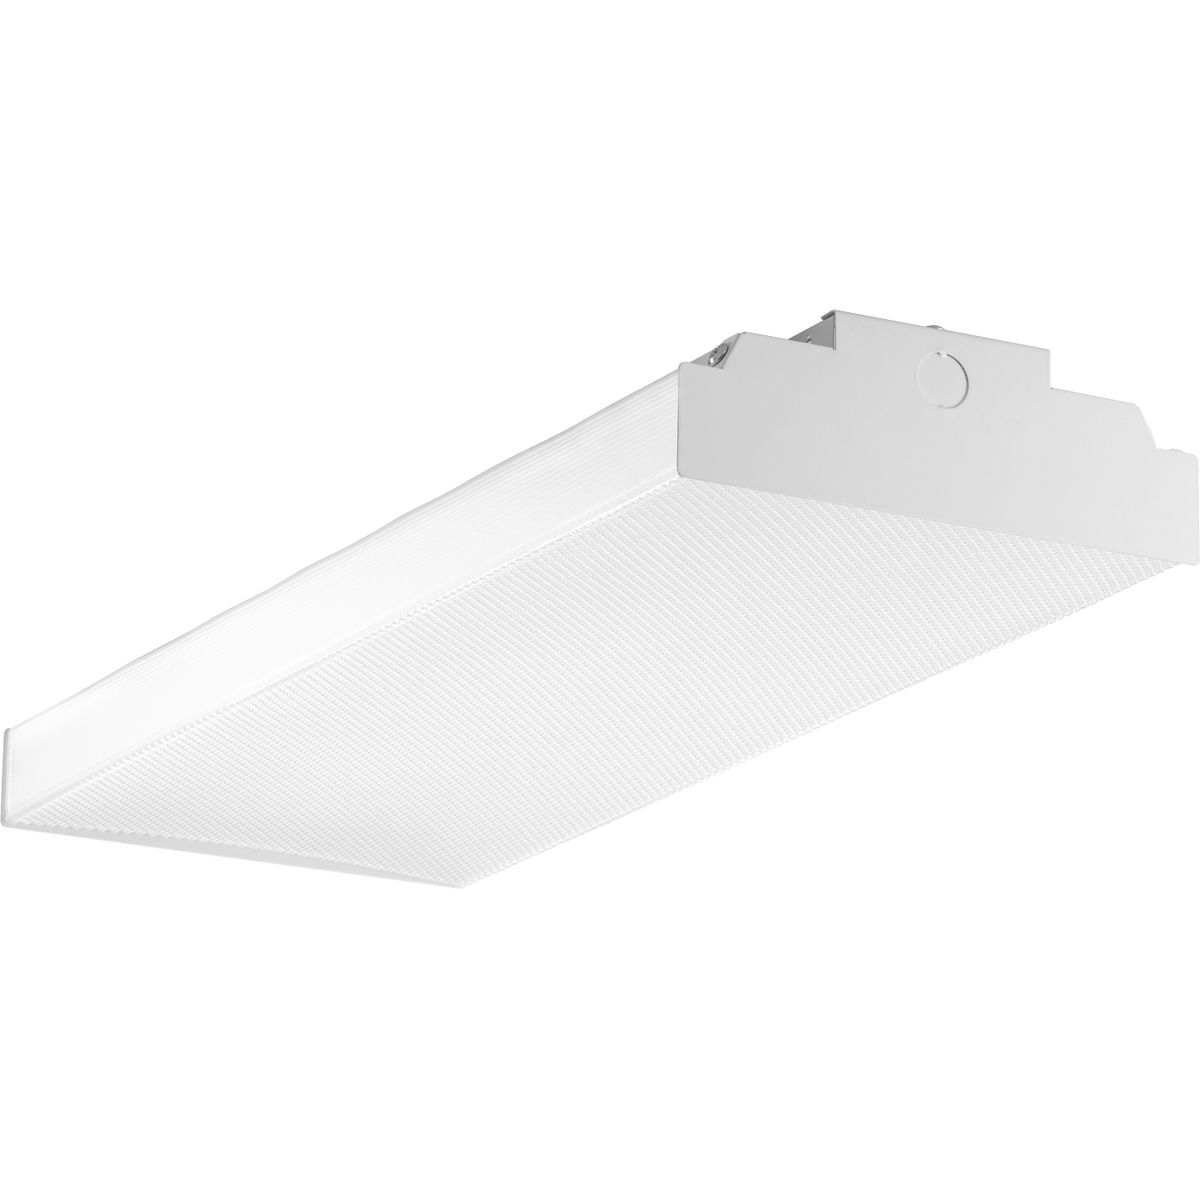 Wrap around with clear extruded acrylic diffuser. Squared white end caps. Surface mounted white chassis regressed within trim. The fixture is energy efficient LED with 2324 lumens and 101 lumens per watt (delivered). 3000K 80 CRI. ENERGY STAR.